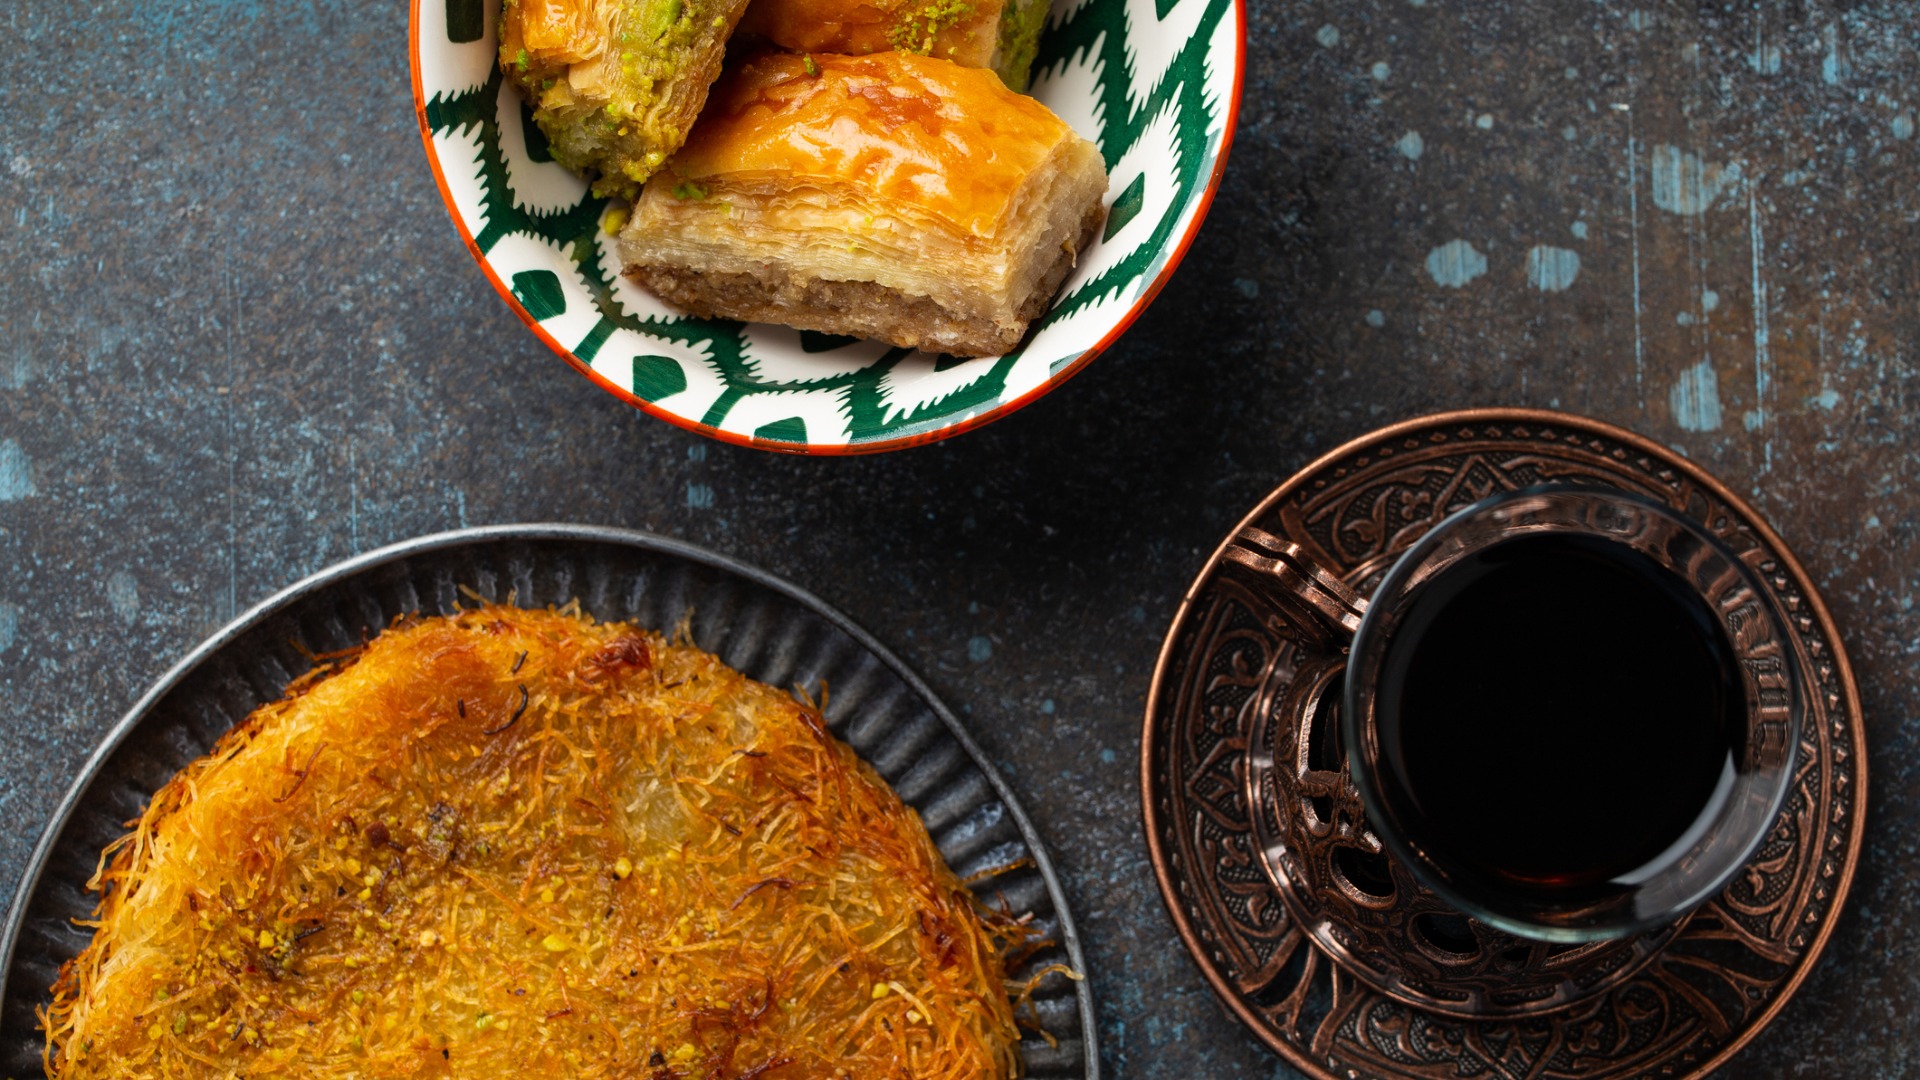 This is a top-down photo that shows a kunefe dessert, some pieces of baklava and a glass of traditional Turkish tea. 